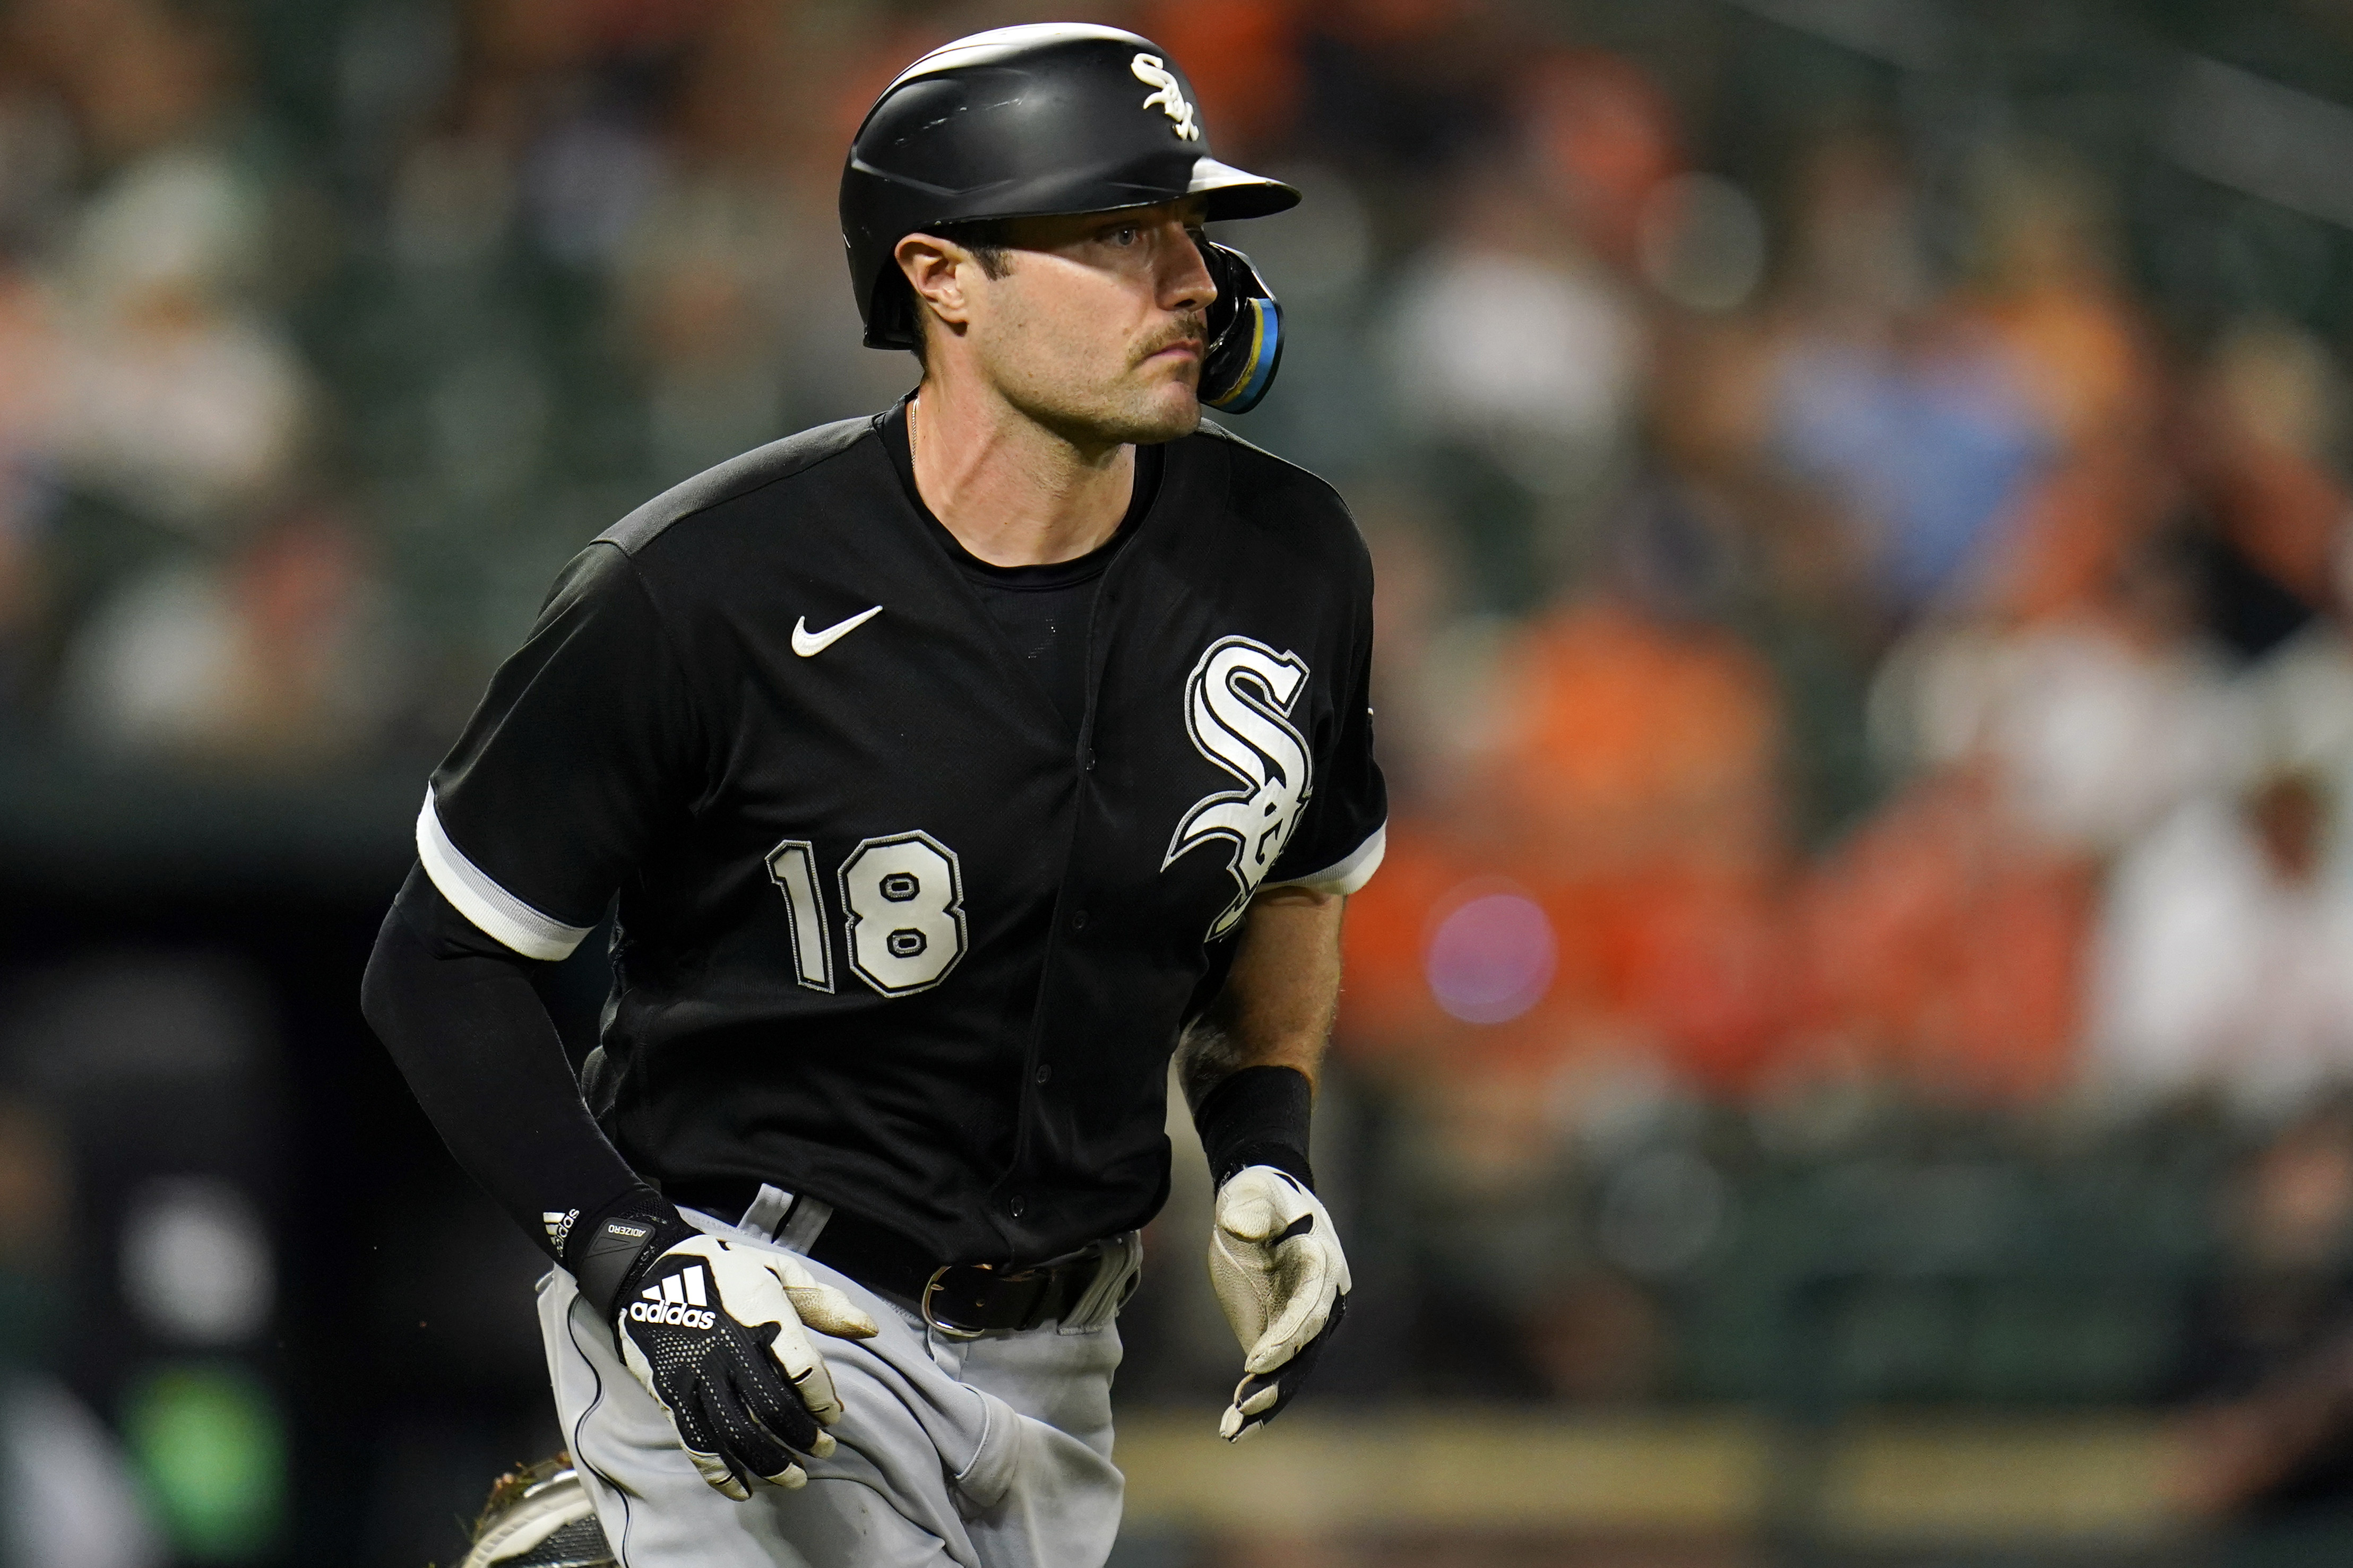 White Sox confident they can rebound from 0-6 road trip